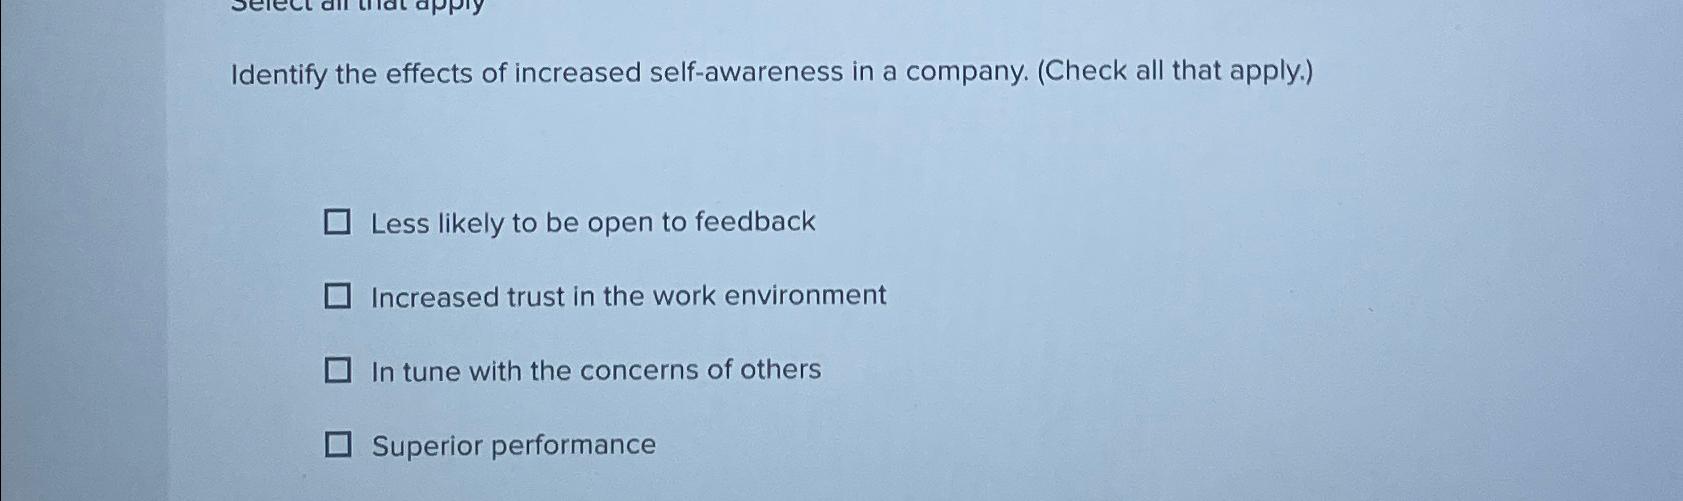 Identify the effects of increased self-awareness in a company. (Check all that apply.) Less likely to be open